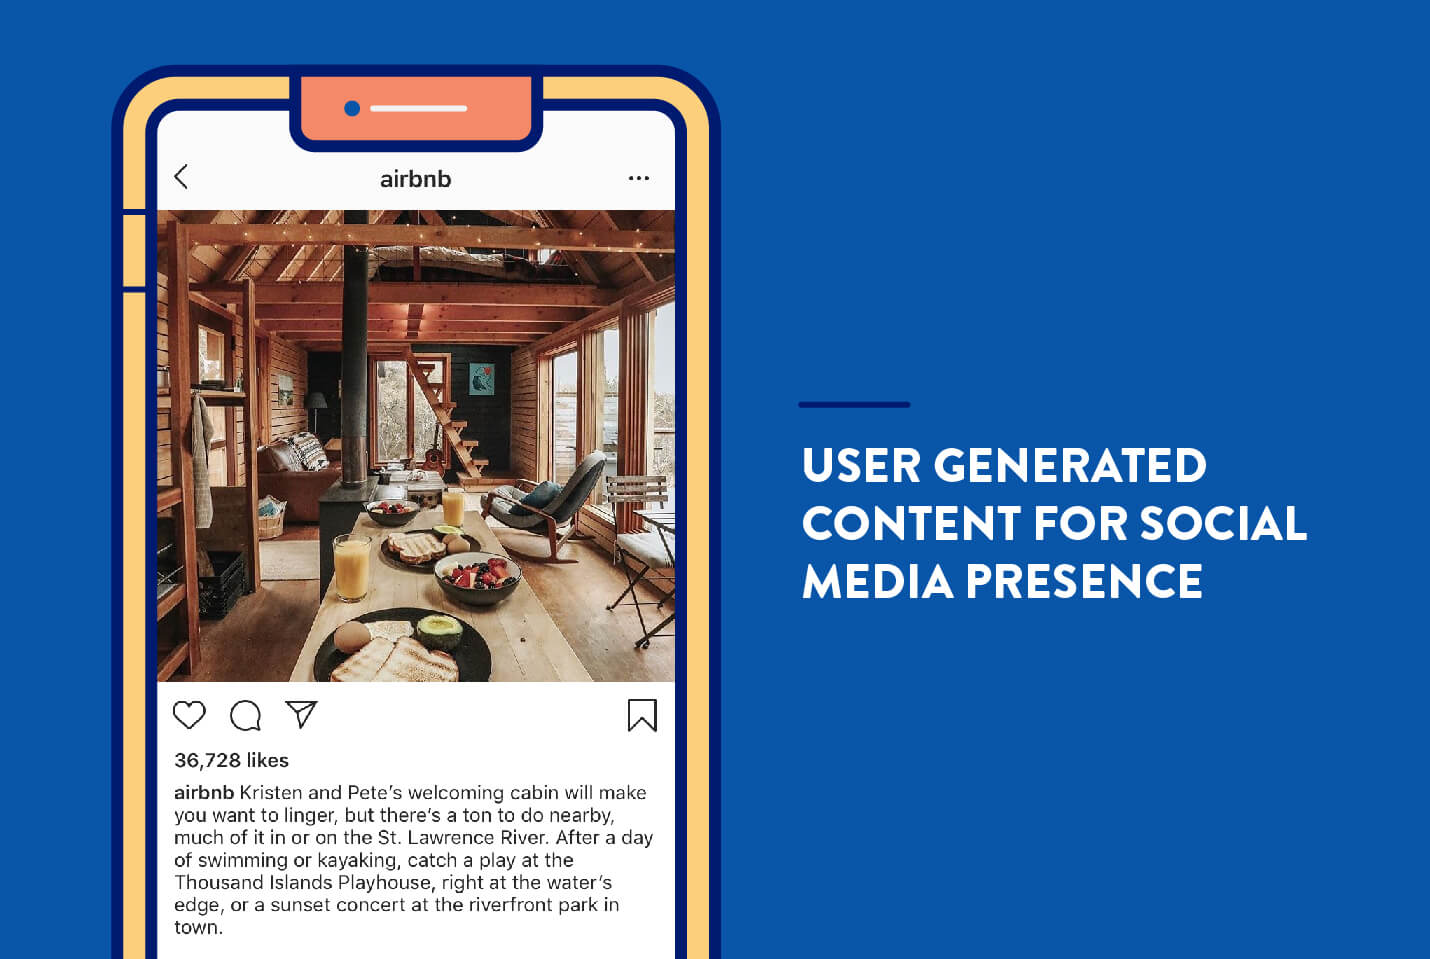 How to market an app using user generated content for social media example from Airbnb